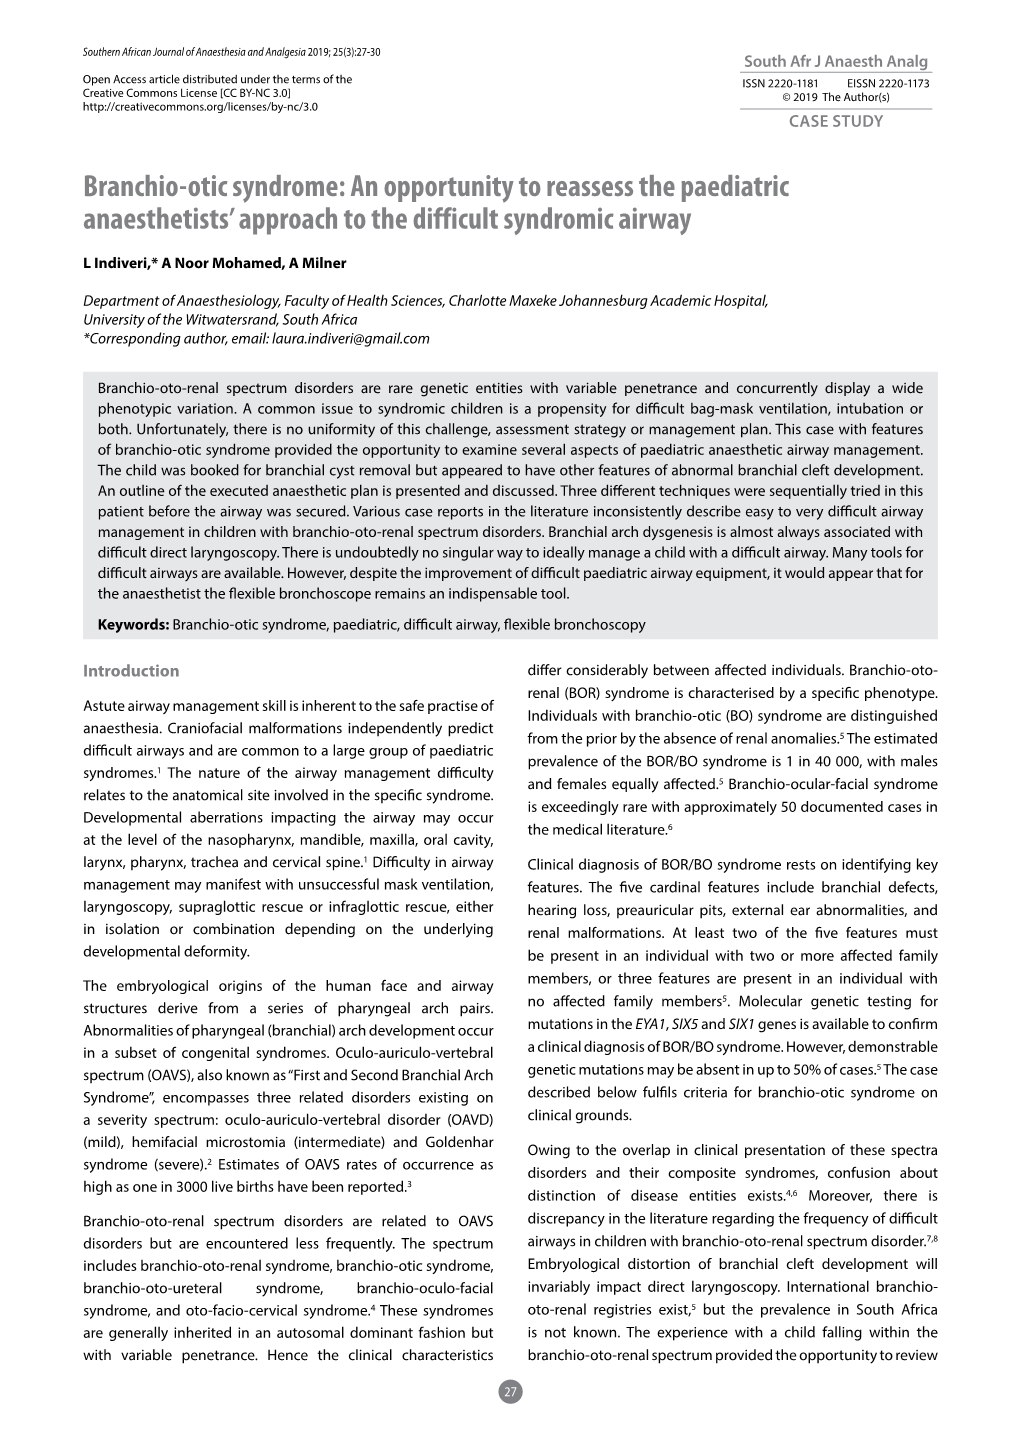 Branchio-Otic Syndrome: an Opportunity to Reassess the Paediatric Anaesthetists’ Approach to the Difficult Syndromic Airway